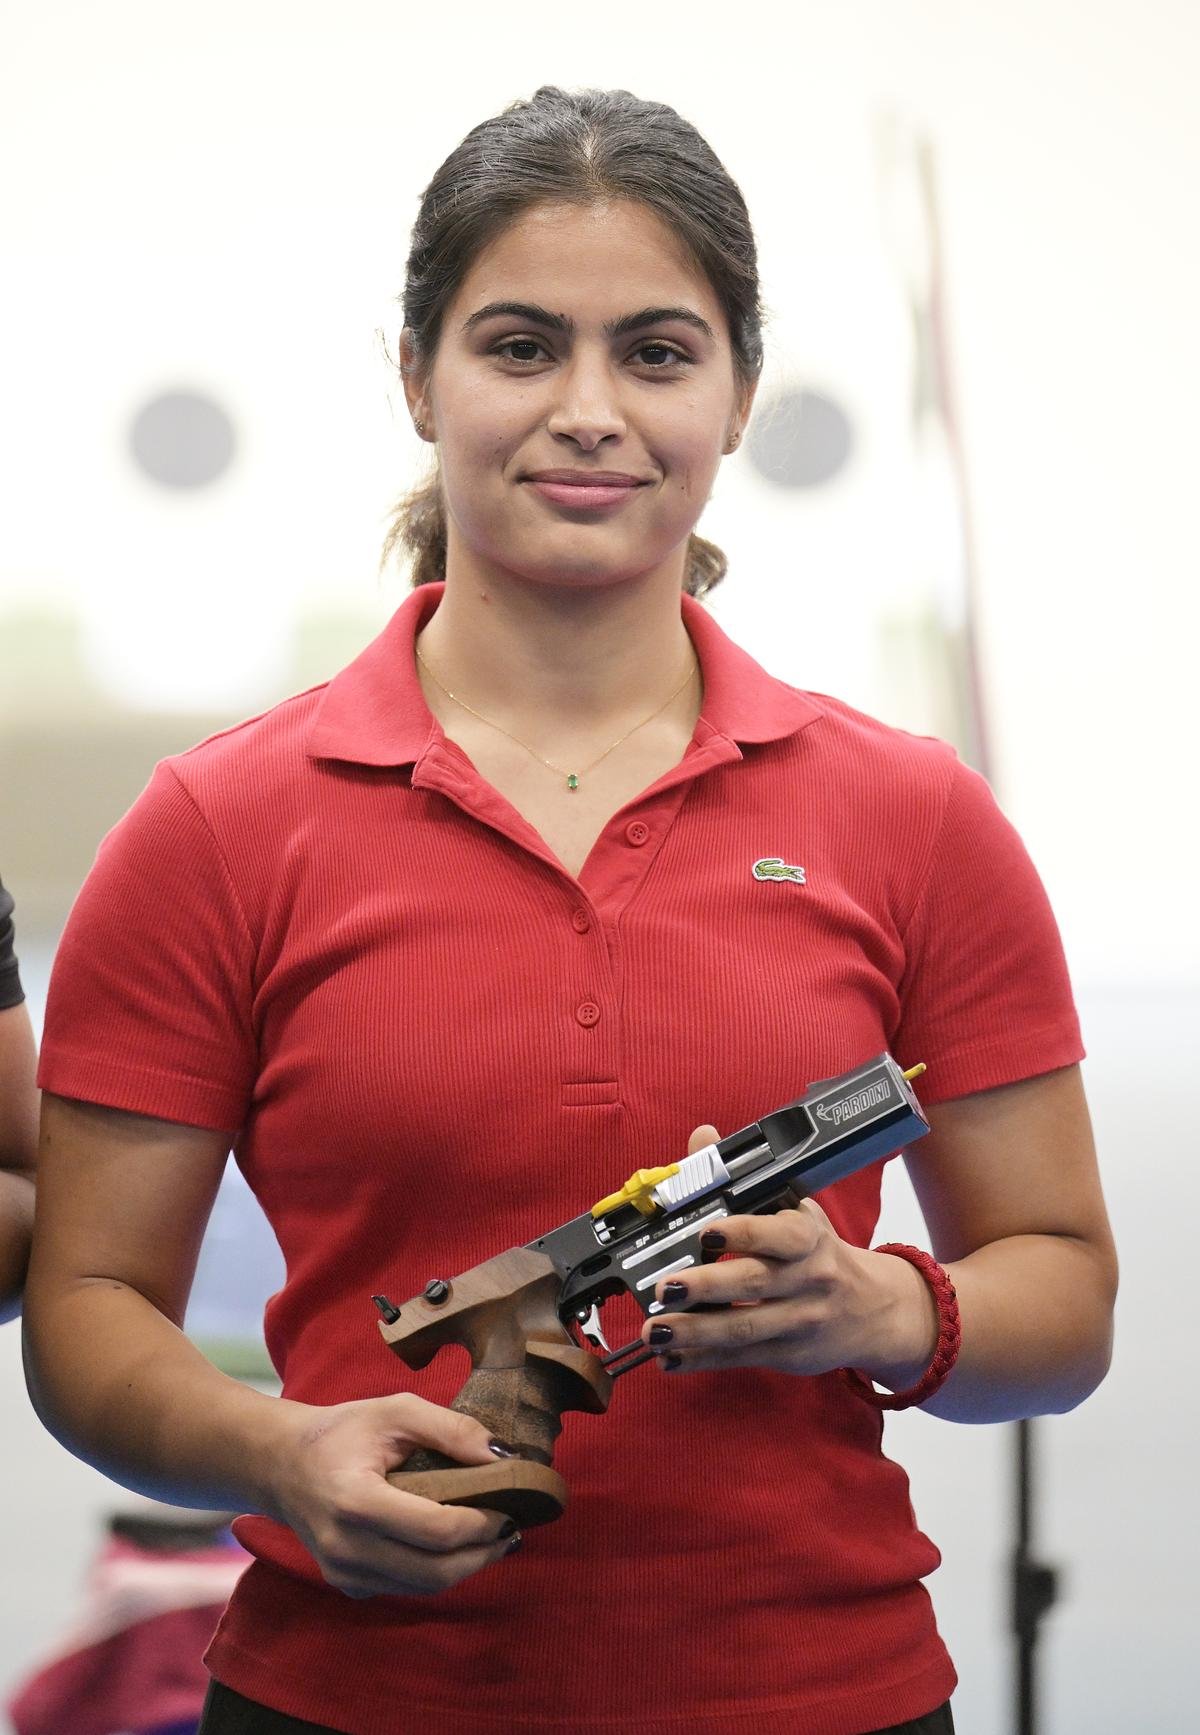 On the right track: Manu shot her highest score since the 2018 Asian Games at the 2023 Asian Championships in Changwon, scoring 591 in the qualification round of the 25m pistol event and securing a quota for the Paris Olympics. 